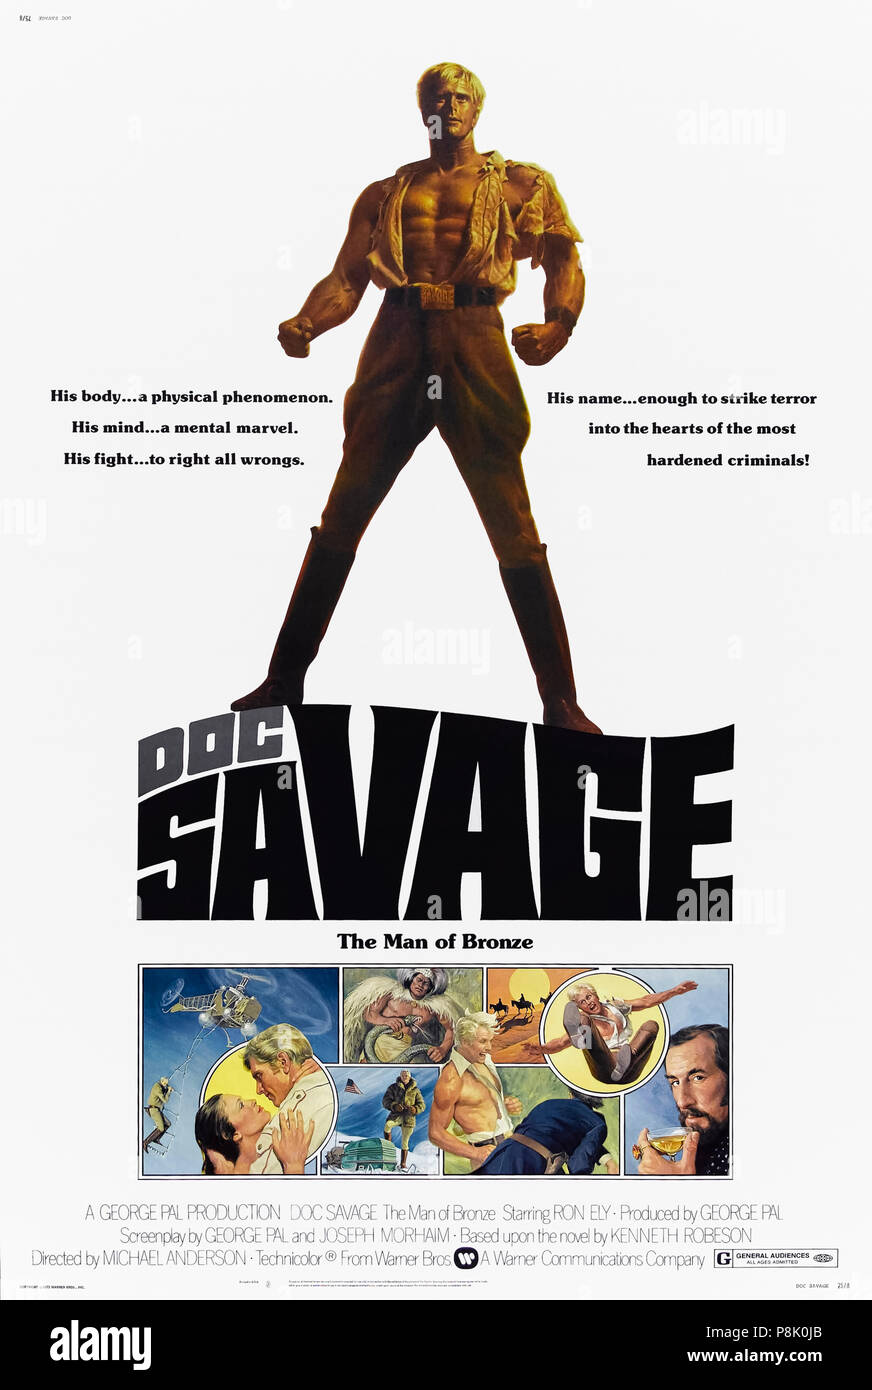 Doc Savage: The Man of Bronze (1975) directed by Michael Anderson and starring Ron Ely, Paul Gleason, William Lucking and Paul Wexler. A curiously camp and humorous big screen outing for the ‘World's First Superhero’ as he takes on Captain Seas and the mysterious green death. Photograph of fully restored and linen backed 1975 US one sheet poster. ***EDITORIAL USE ONLY*** Credit: BFA / Warner Bros Stock Photo